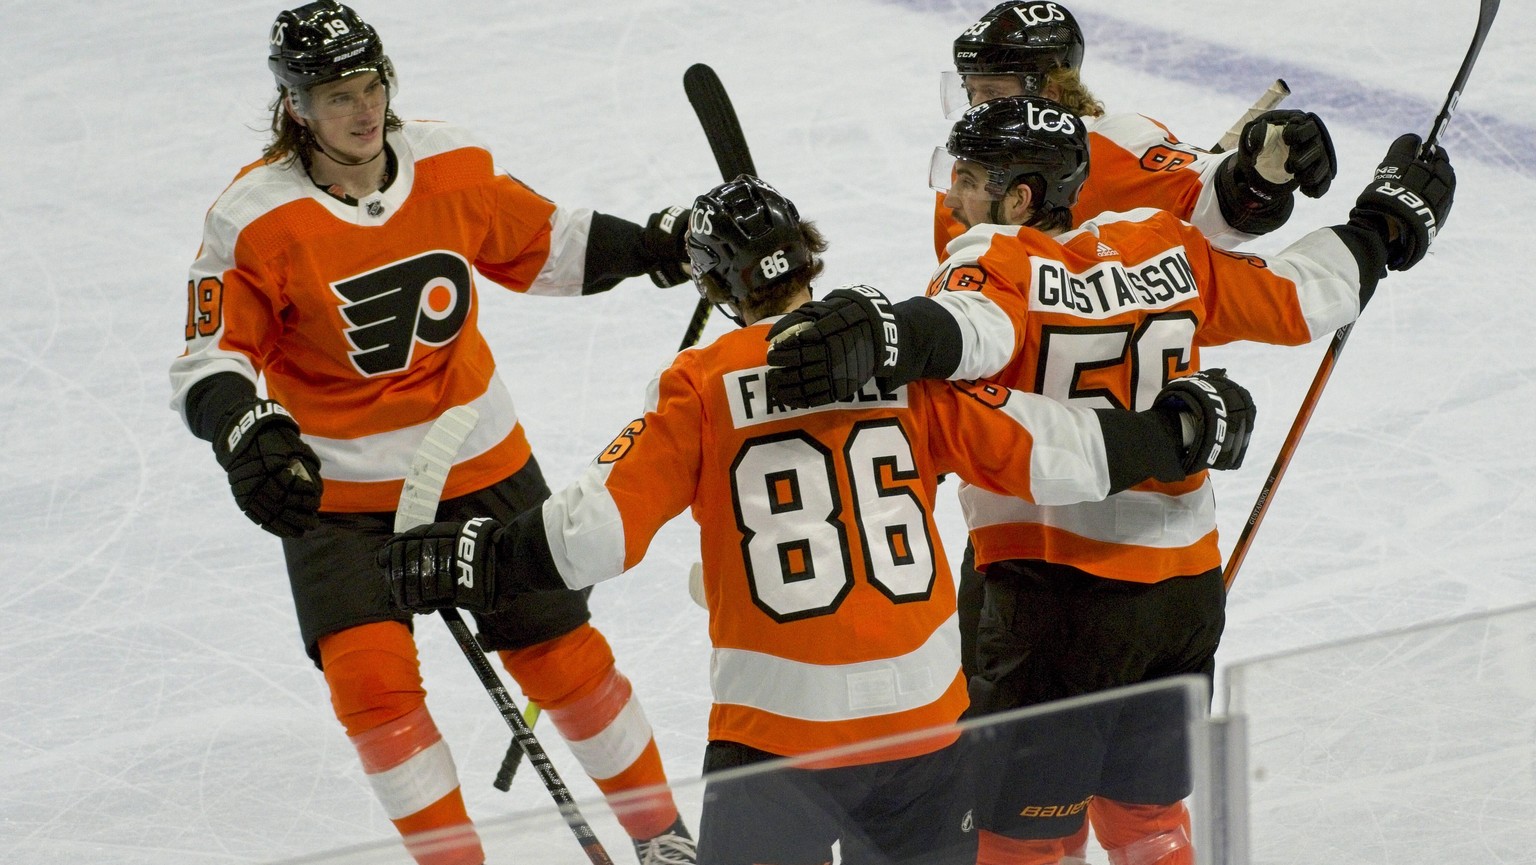 PHILADELPHIA, PA - JANUARY 13: Philadelphia Flyers Center Nolan Patrick 19 celebrates his goal during the game between the Pittsburg Penquins and the Philadelphia Flyers on January 13, 2021 at Wells F ...